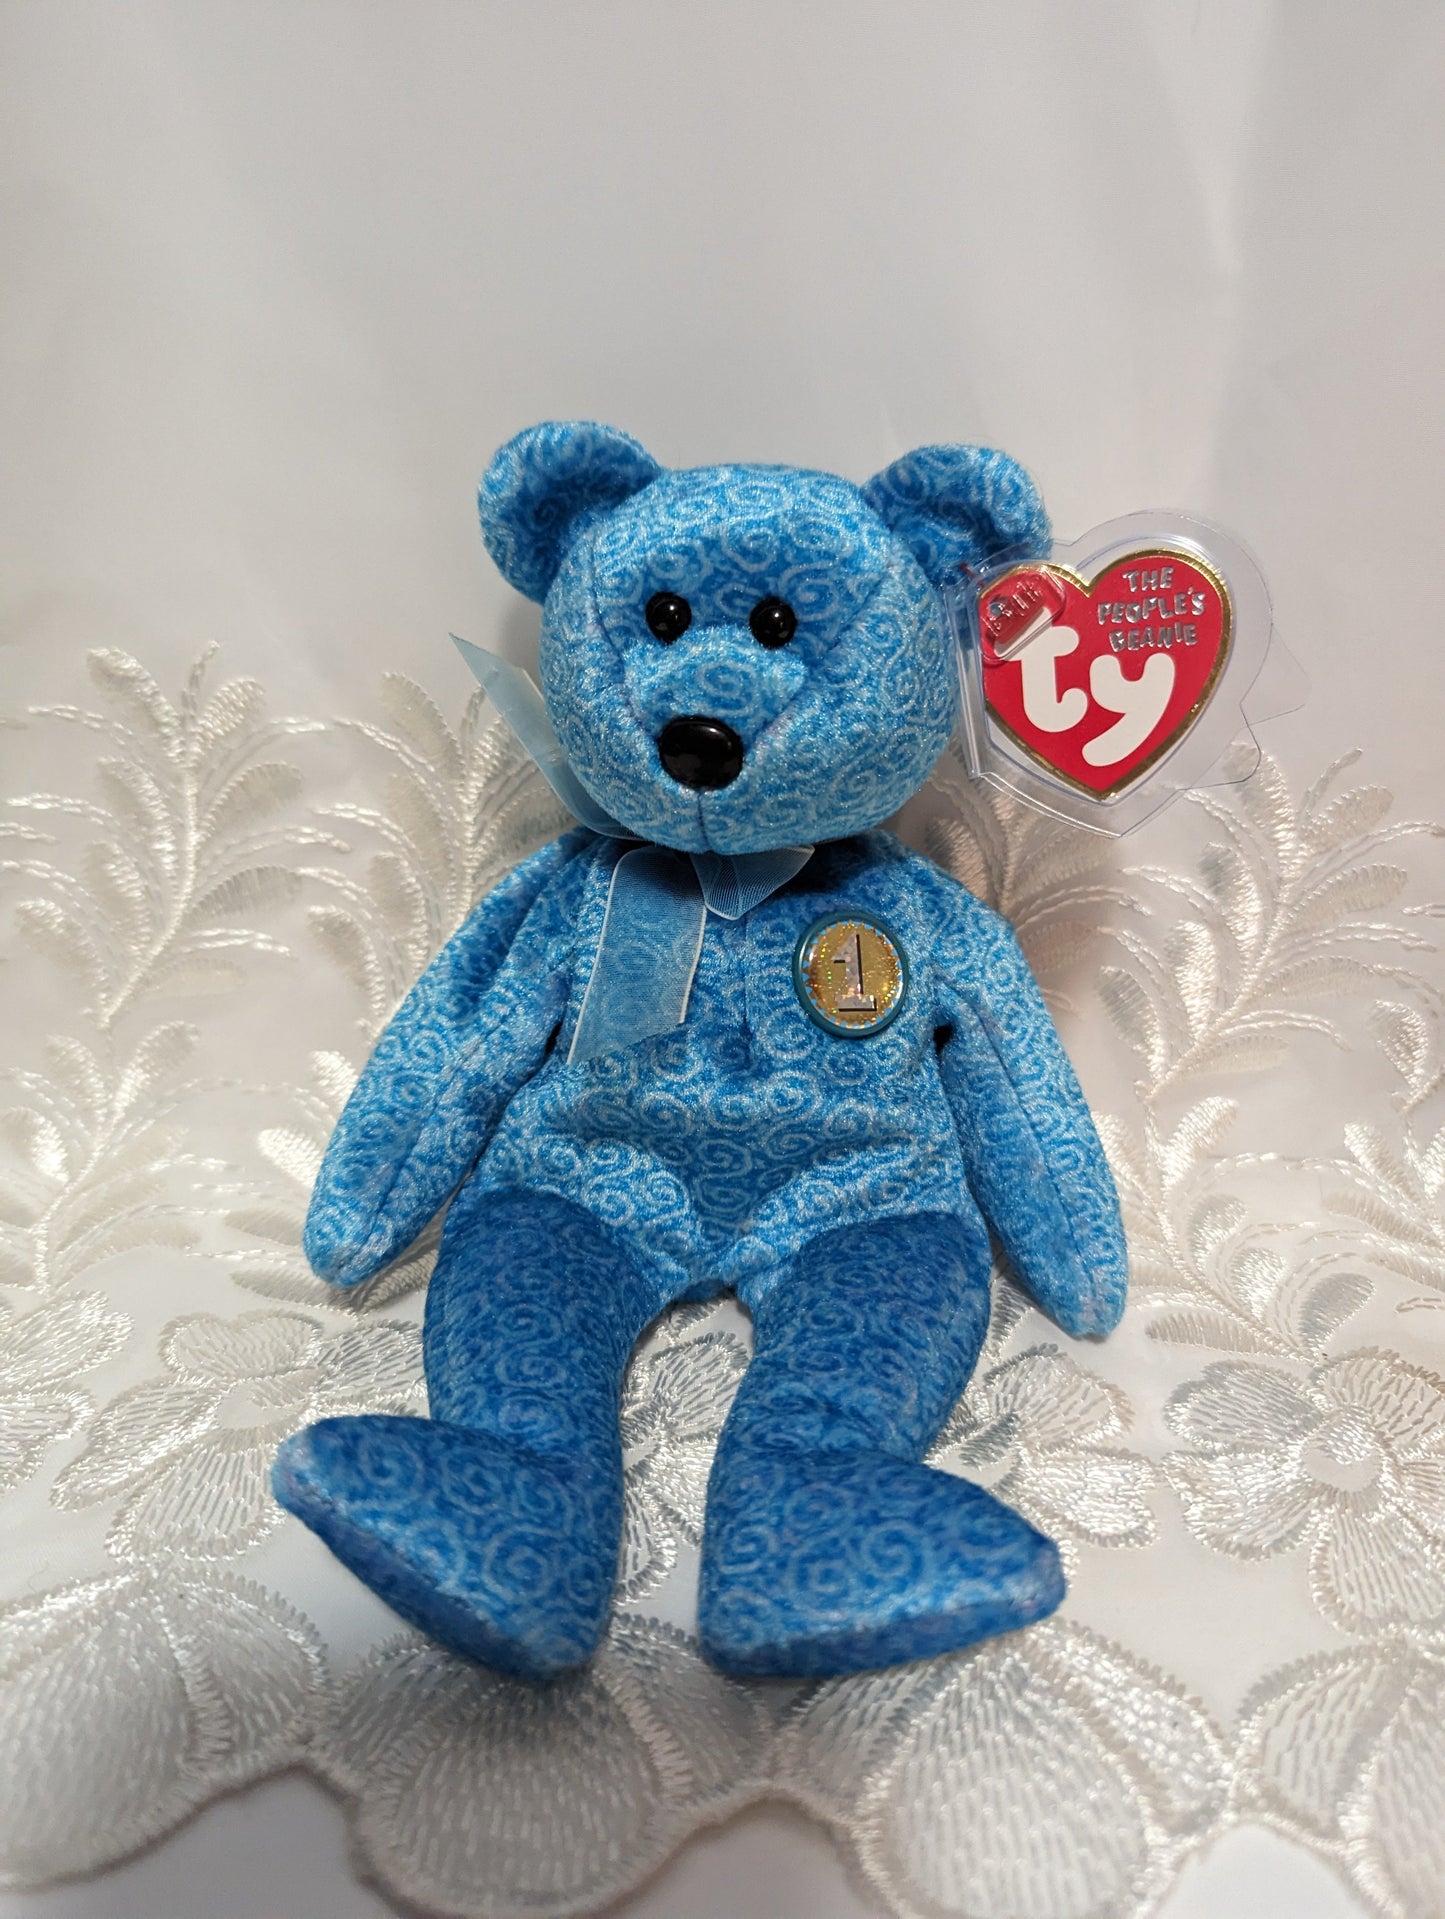 Ty Beanie Baby - Classy The Bear (The People's Beanie) 8.5in - Vintage Beanies Canada